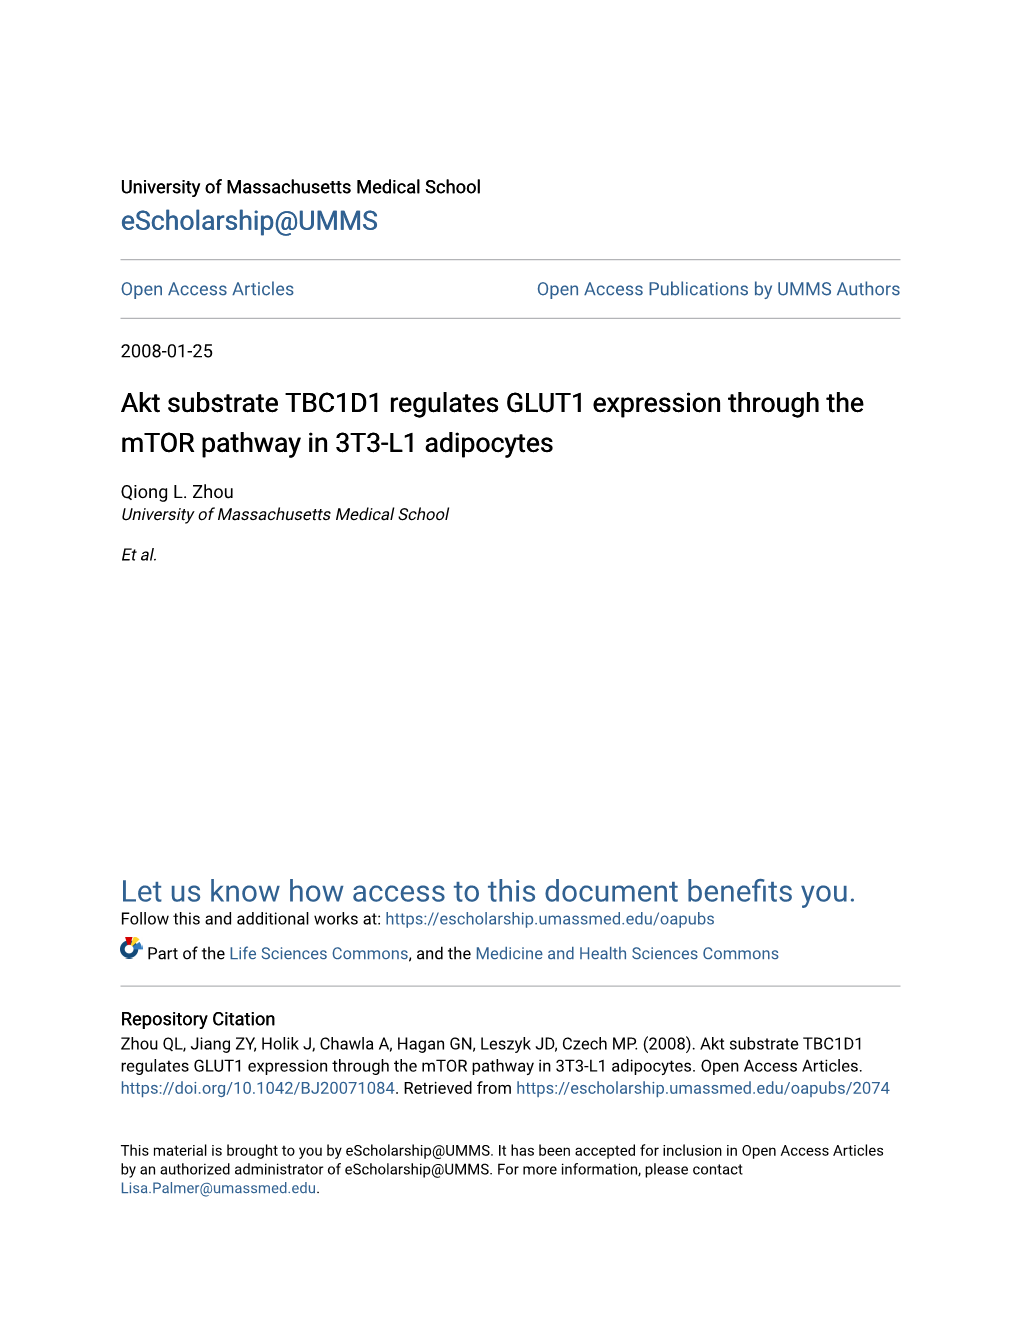 Akt Substrate TBC1D1 Regulates GLUT1 Expression Through the Mtor Pathway in 3T3-L1 Adipocytes